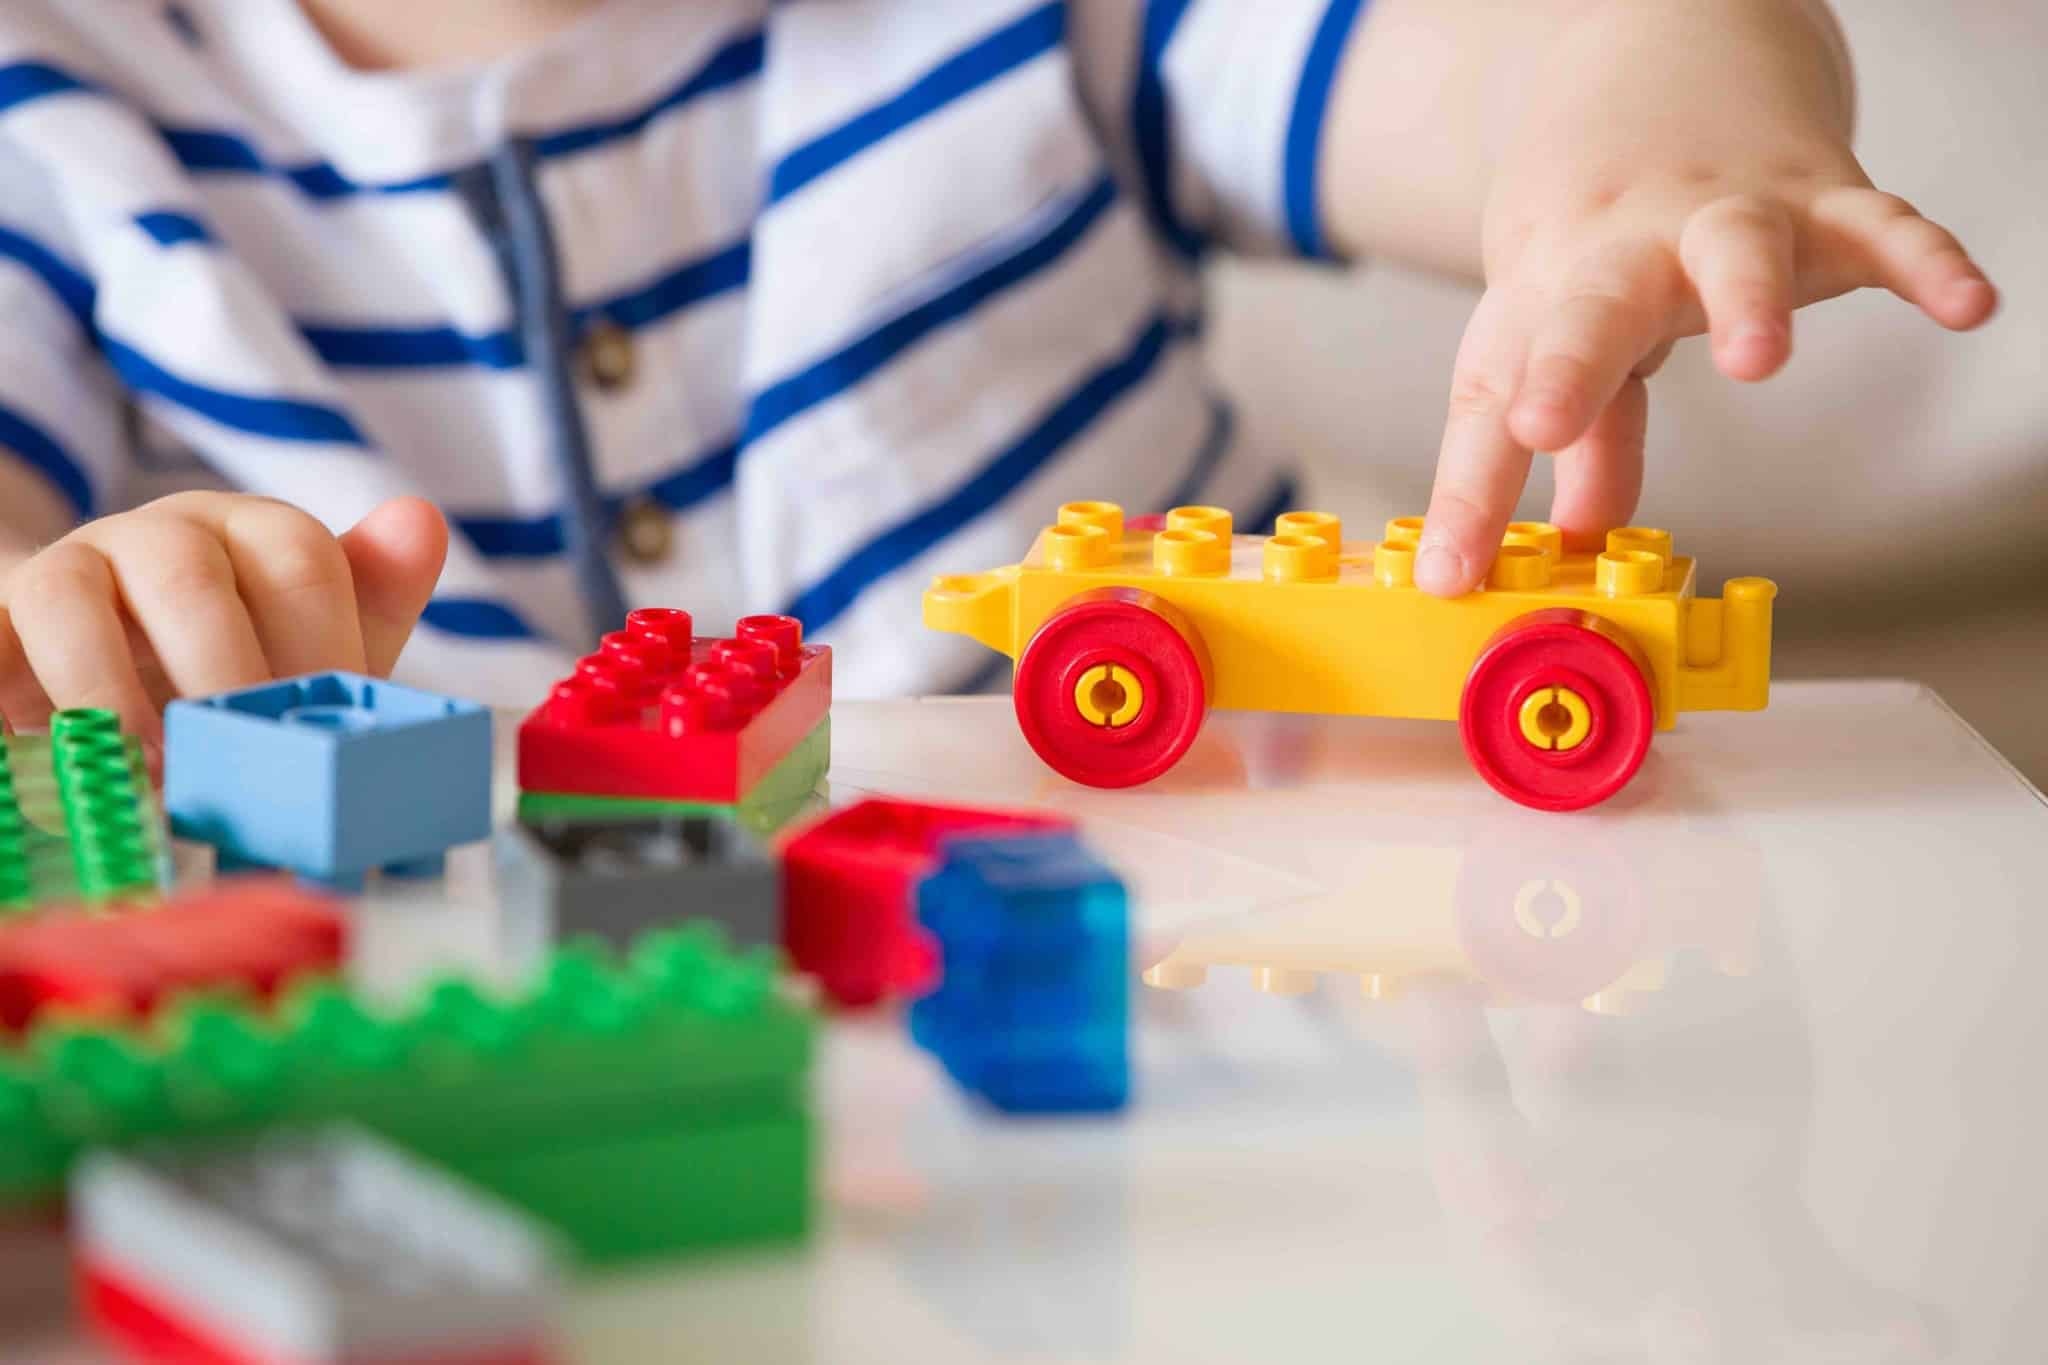 The 7 Best Non-Toxic Crayons for Babies and Toddlers